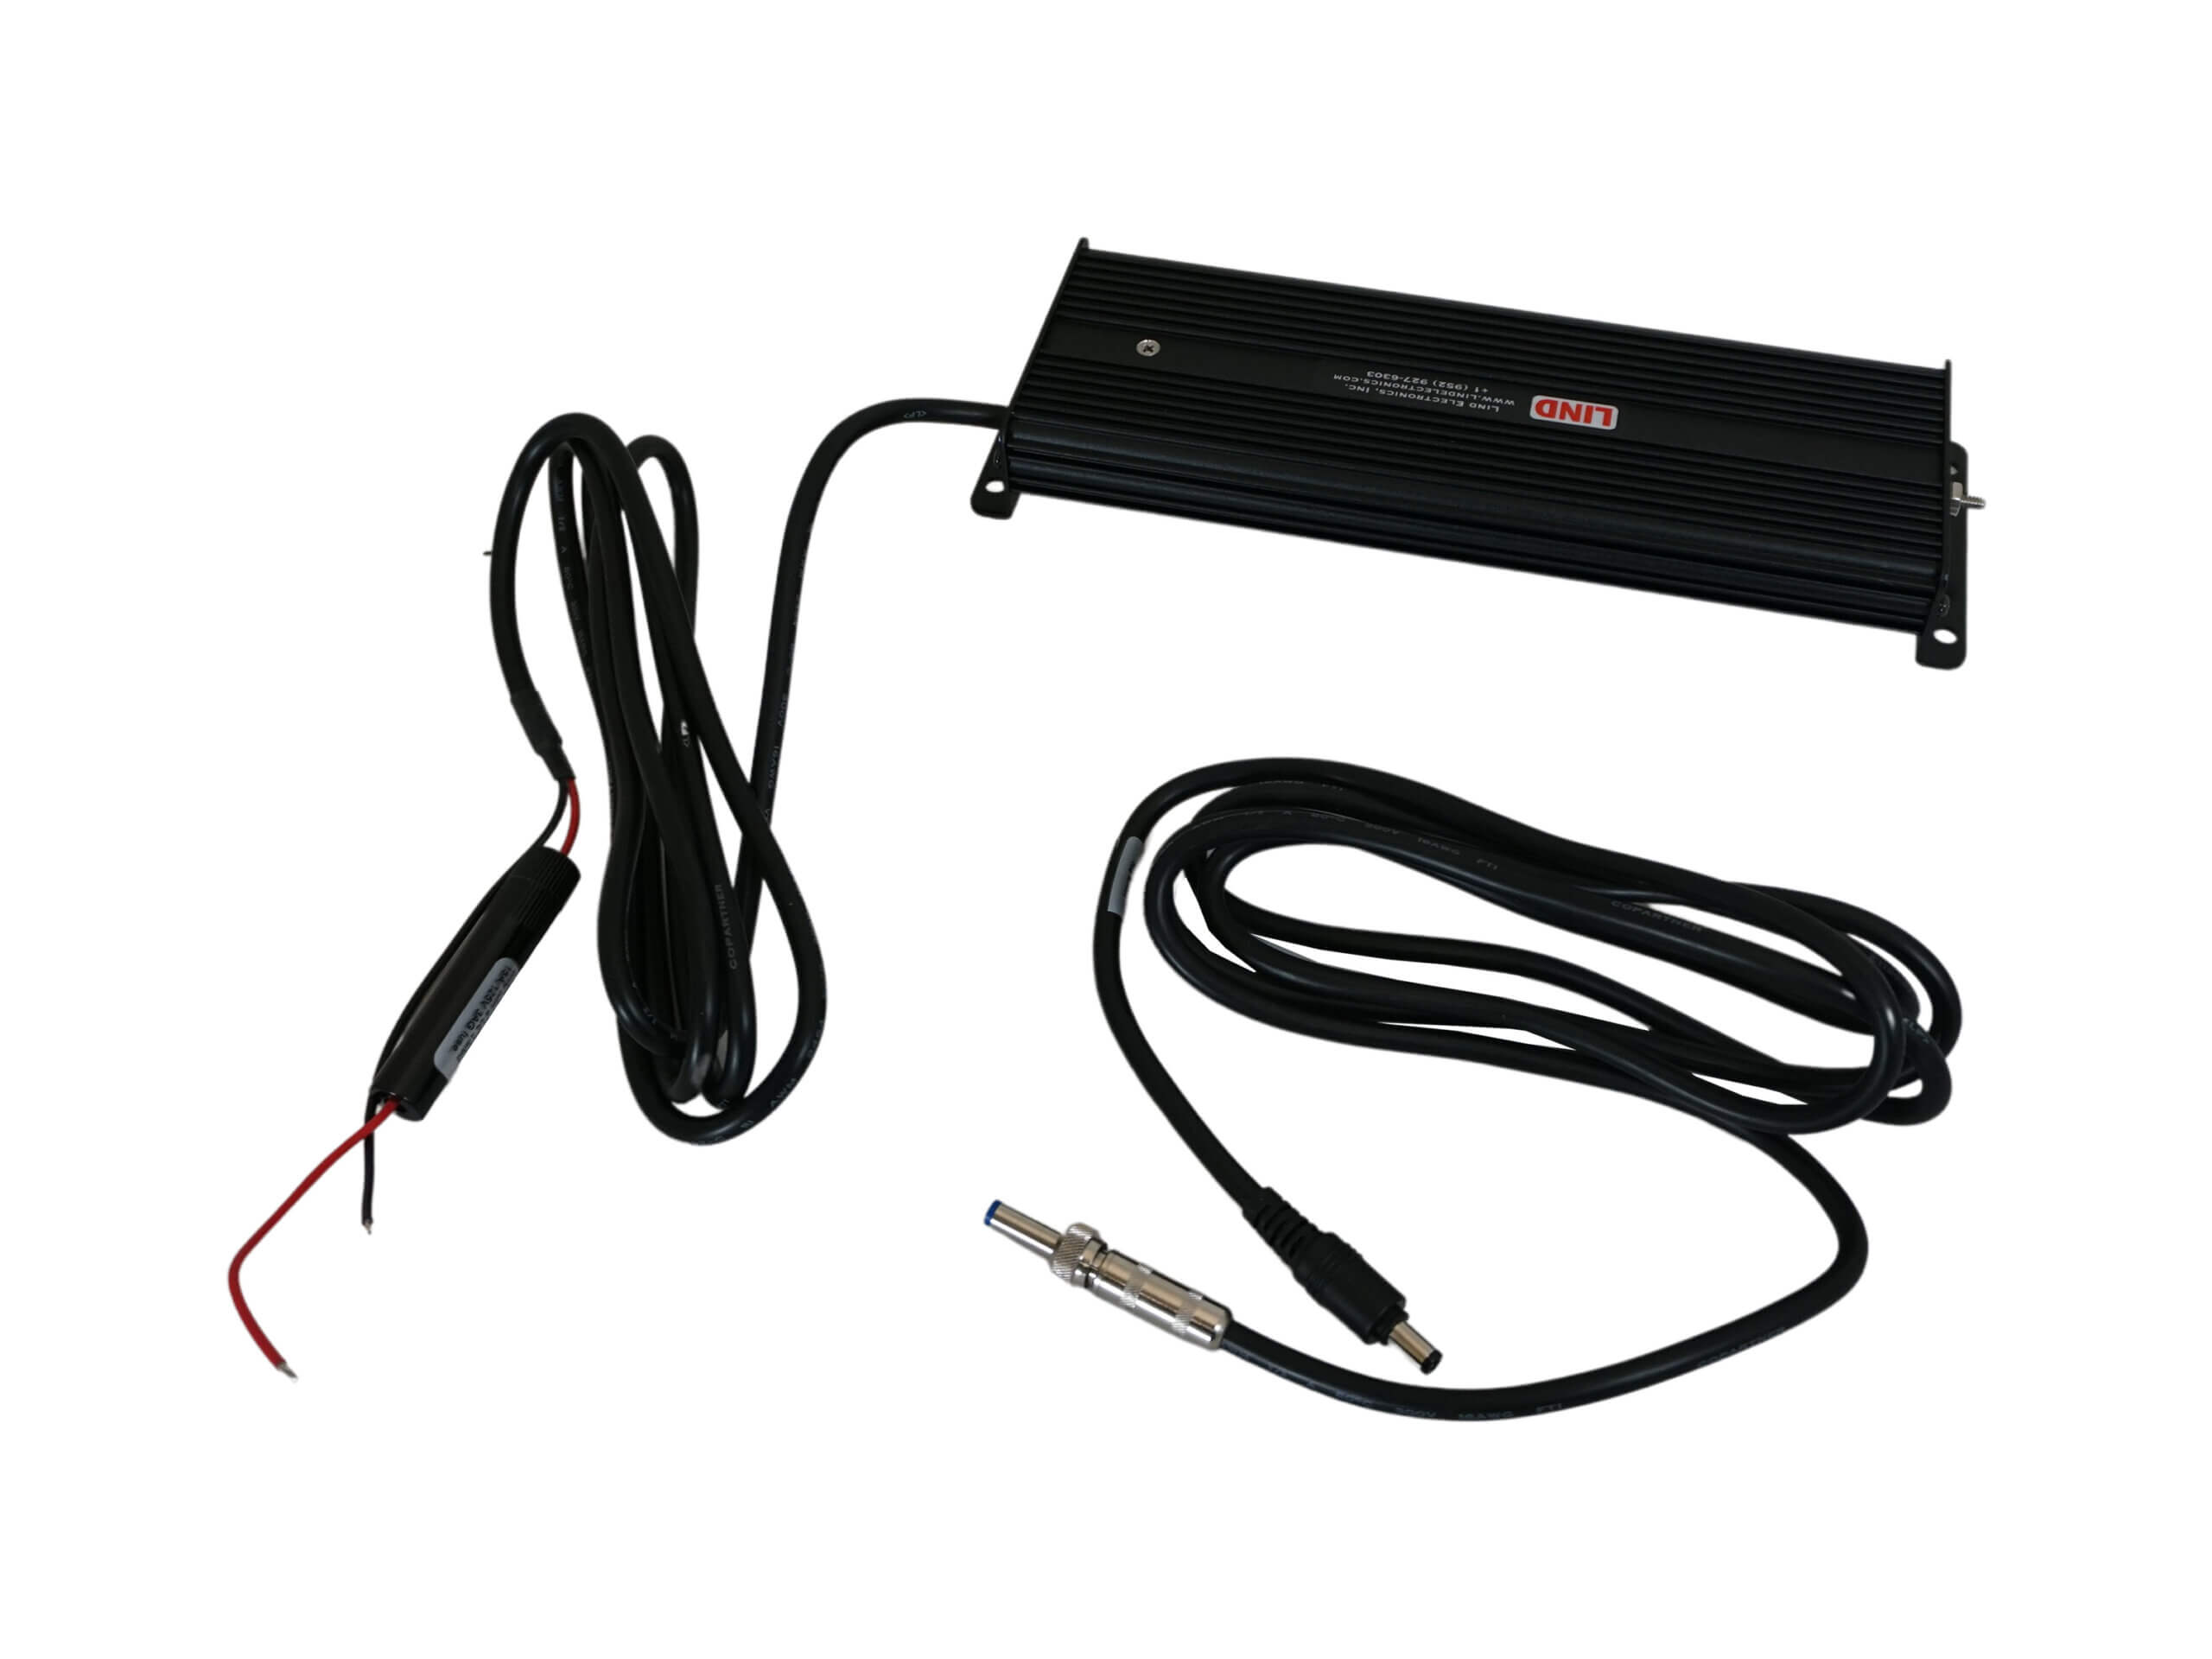 Isolated 100 Watt Power Supply used for 70-110 VDC Input Vehicle with DS-DELL-900 Series Docking Stations